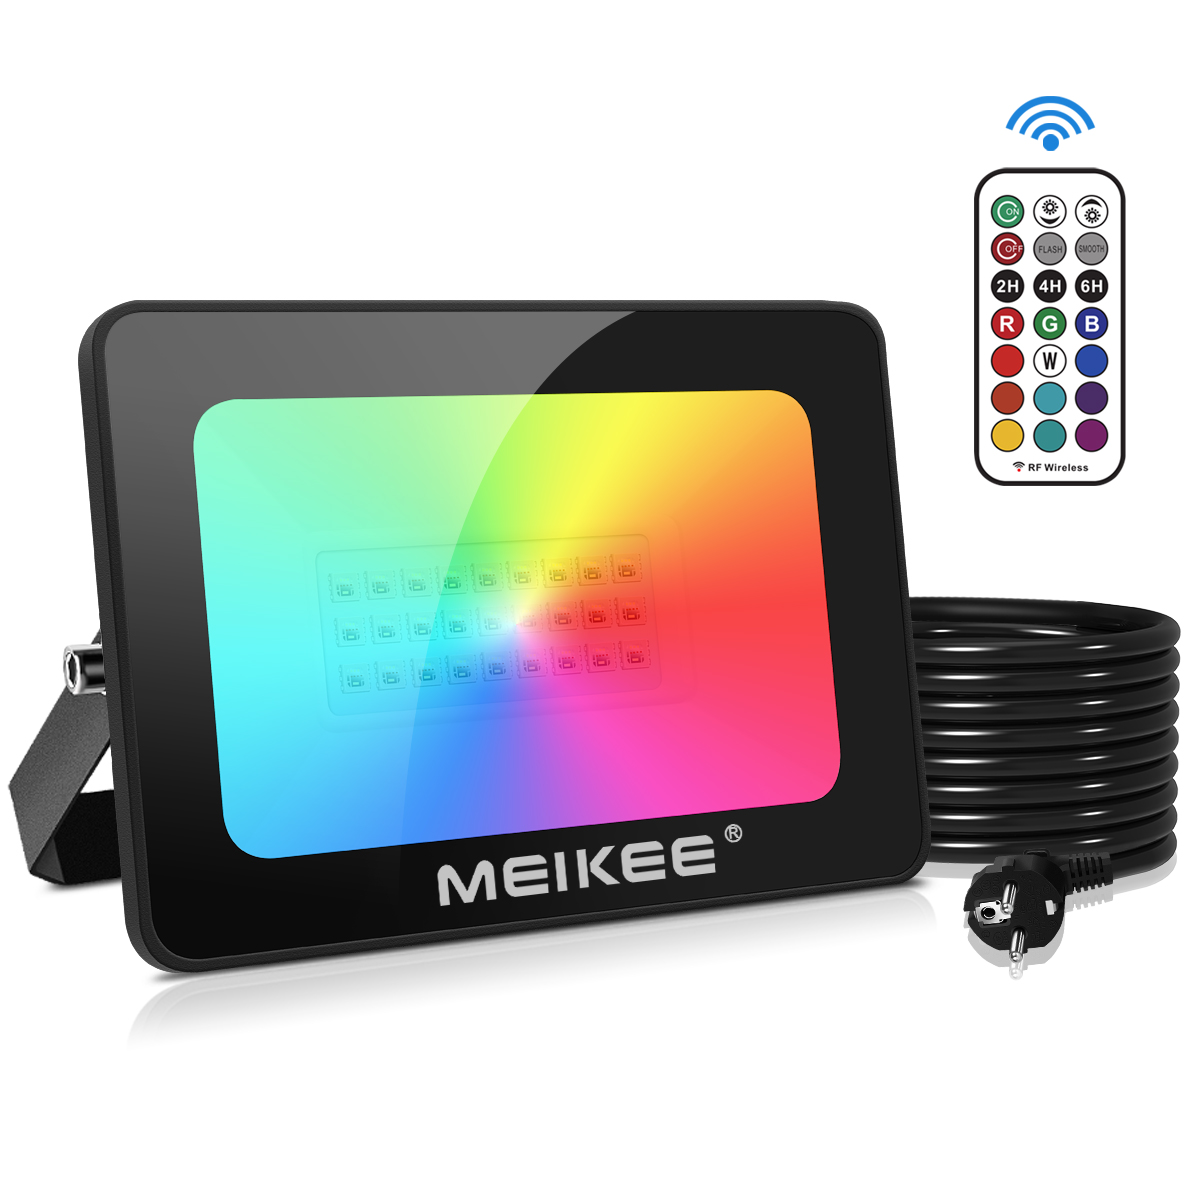 MEIKEE 25W RGB Led Floodlights Remote Control Christmas Lights IP66 Waterproof Memory Timing Function Color Changing Light Outdoor Decoration for Halloween Birthday Party Easter Strobe Garden Pond